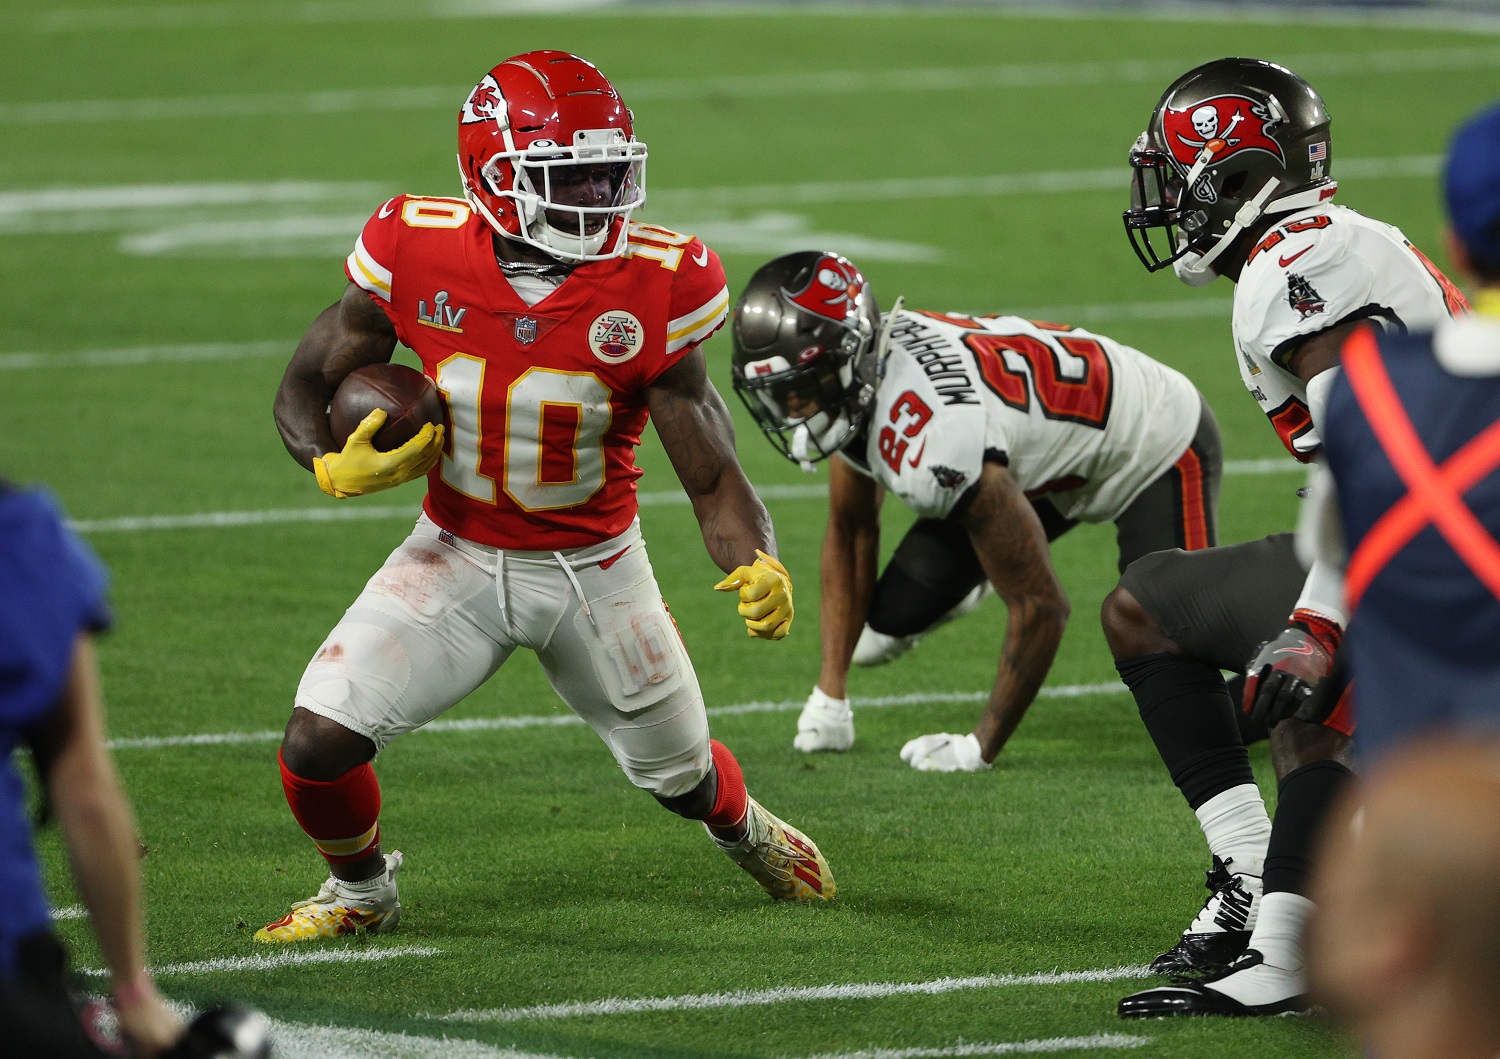 Tyreek Hill of the Kansas City Chiefs scrambles ahead of Sean Murphy-Bunting of the Tampa Bay Buccaneers in Super Bowl 55 in Tampa, Florida.